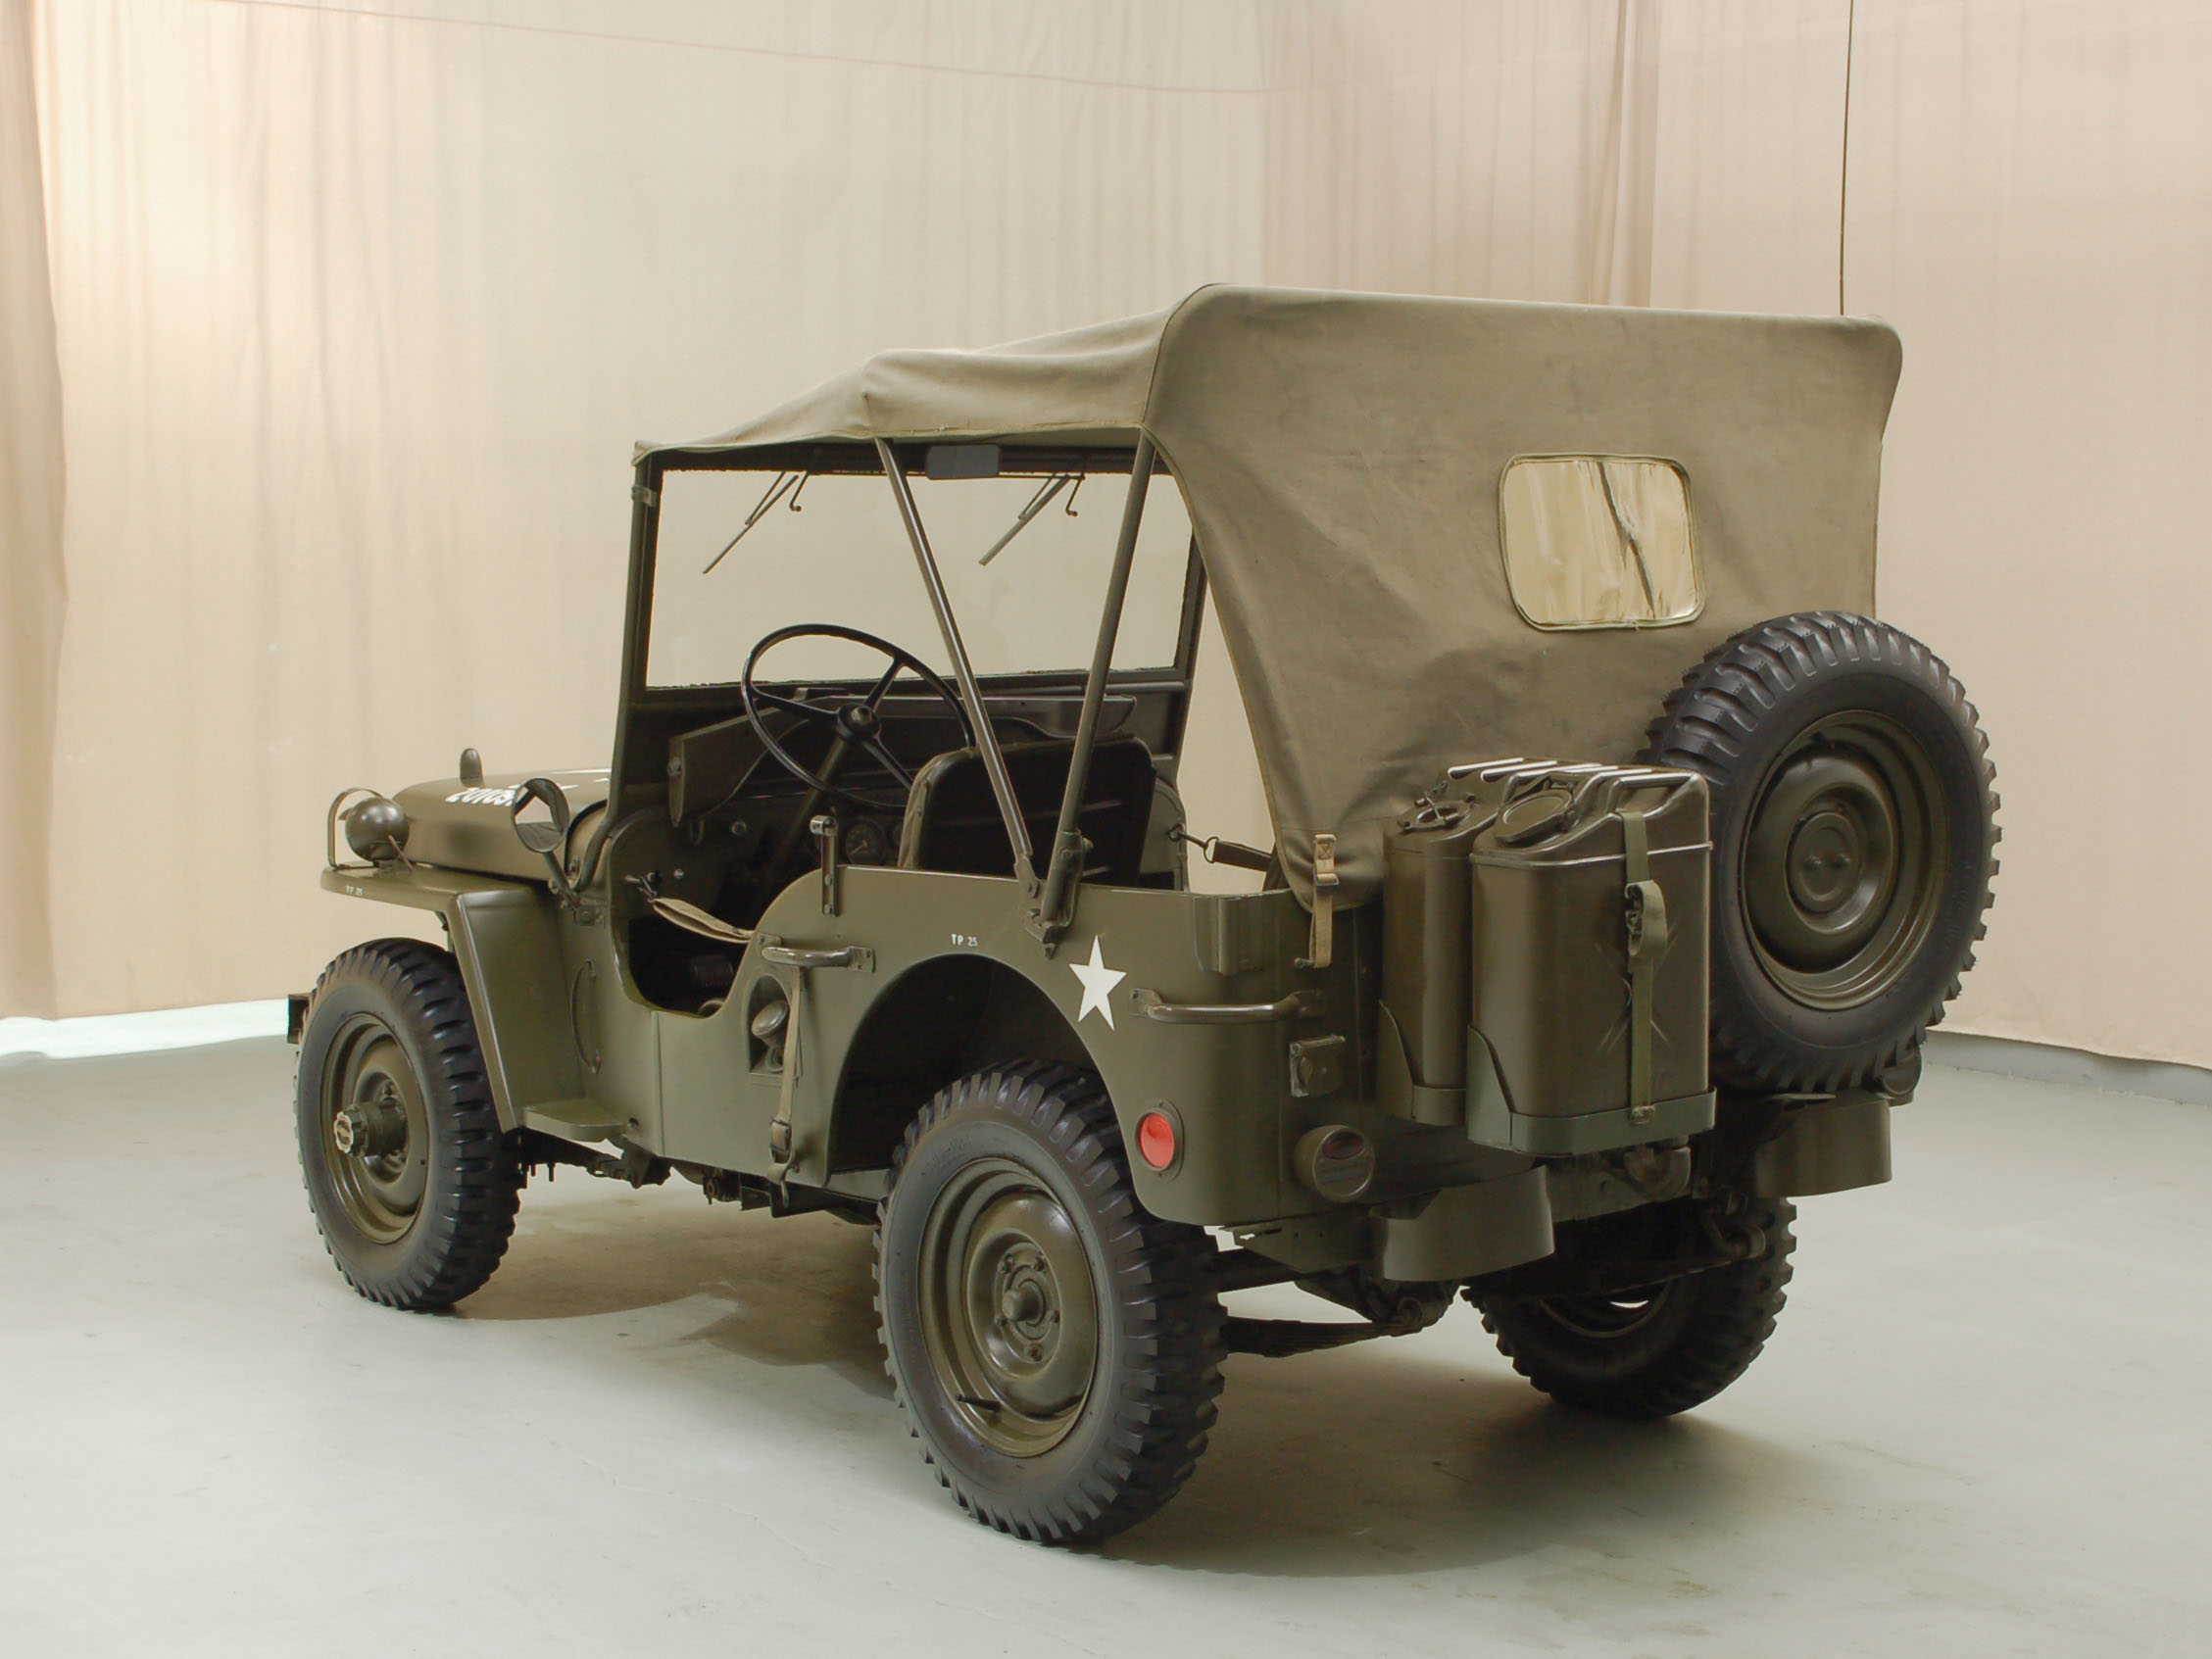 1942 willys-overland mb (jeep) 1/4 ton